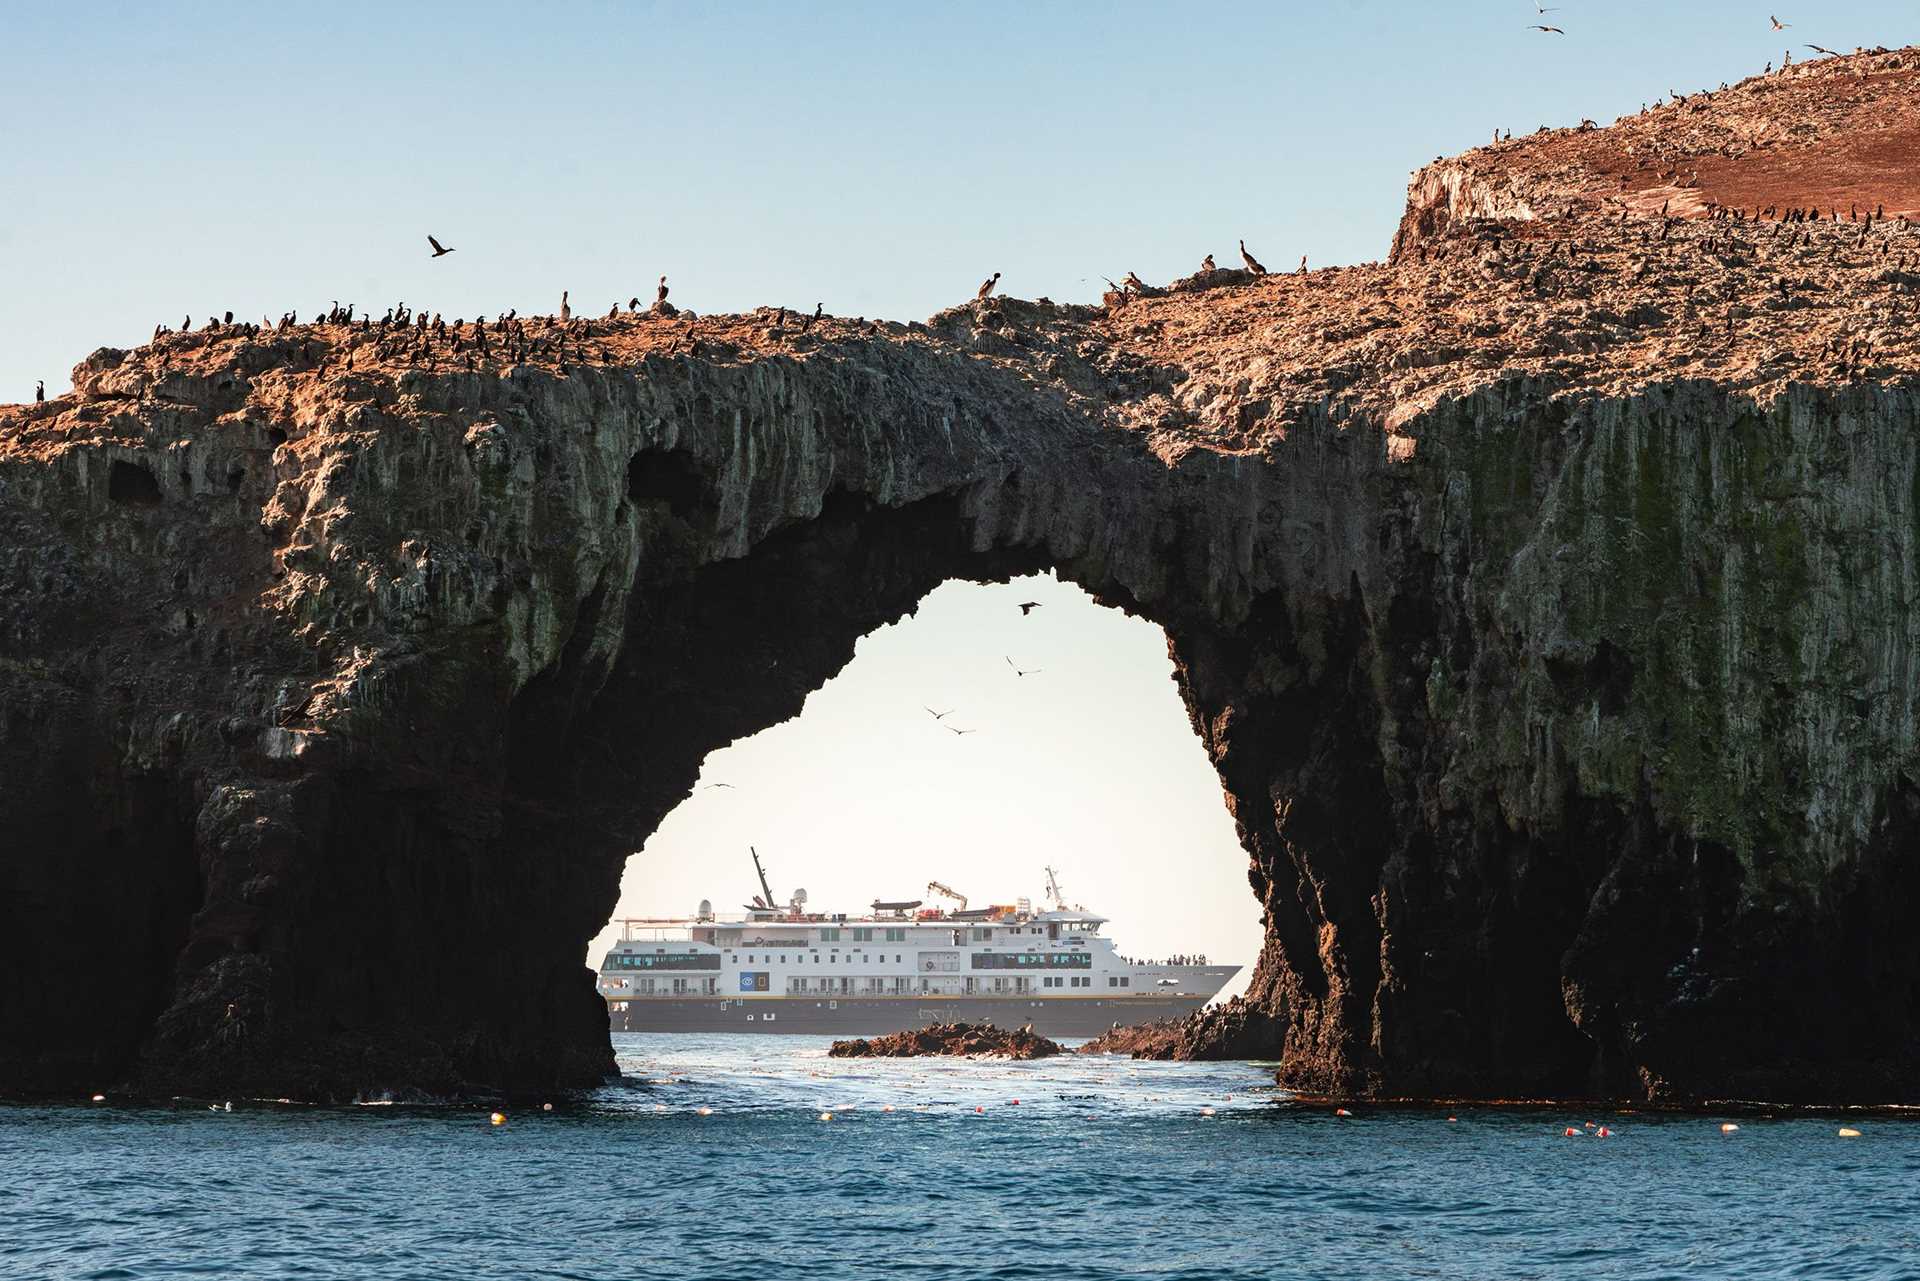 a large rock arch frames a ship. birds are perched on top of the rocks.